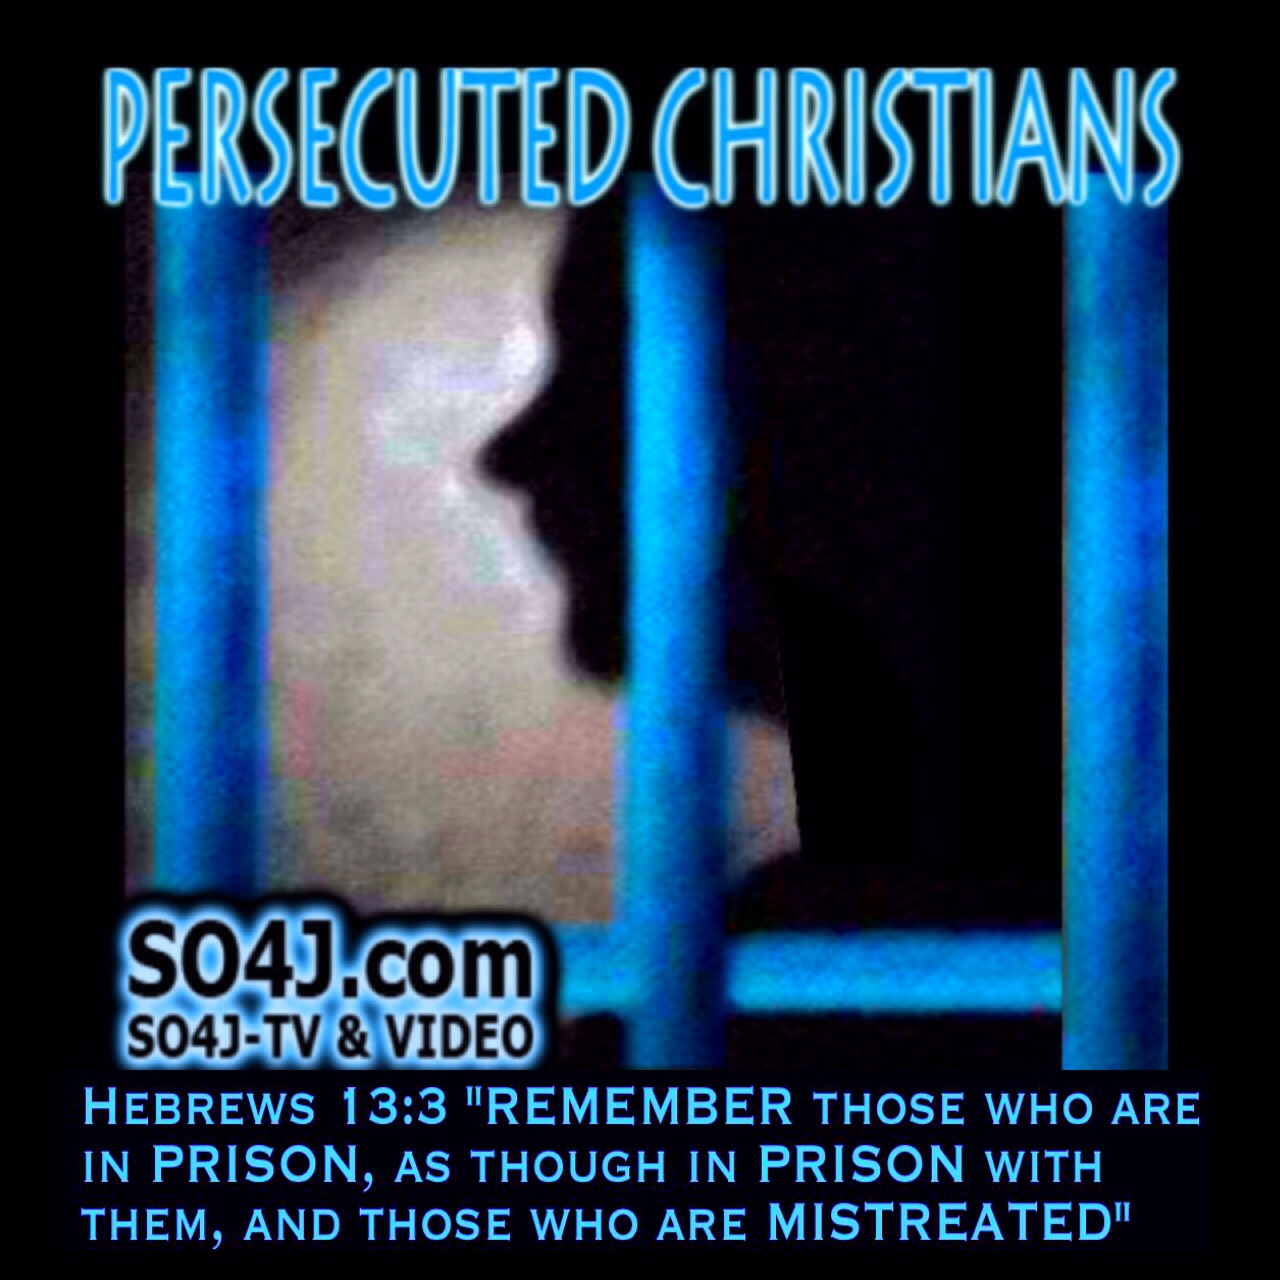 Persecuted Christians Facts & Videos - SO4J-TV - SO4J.com